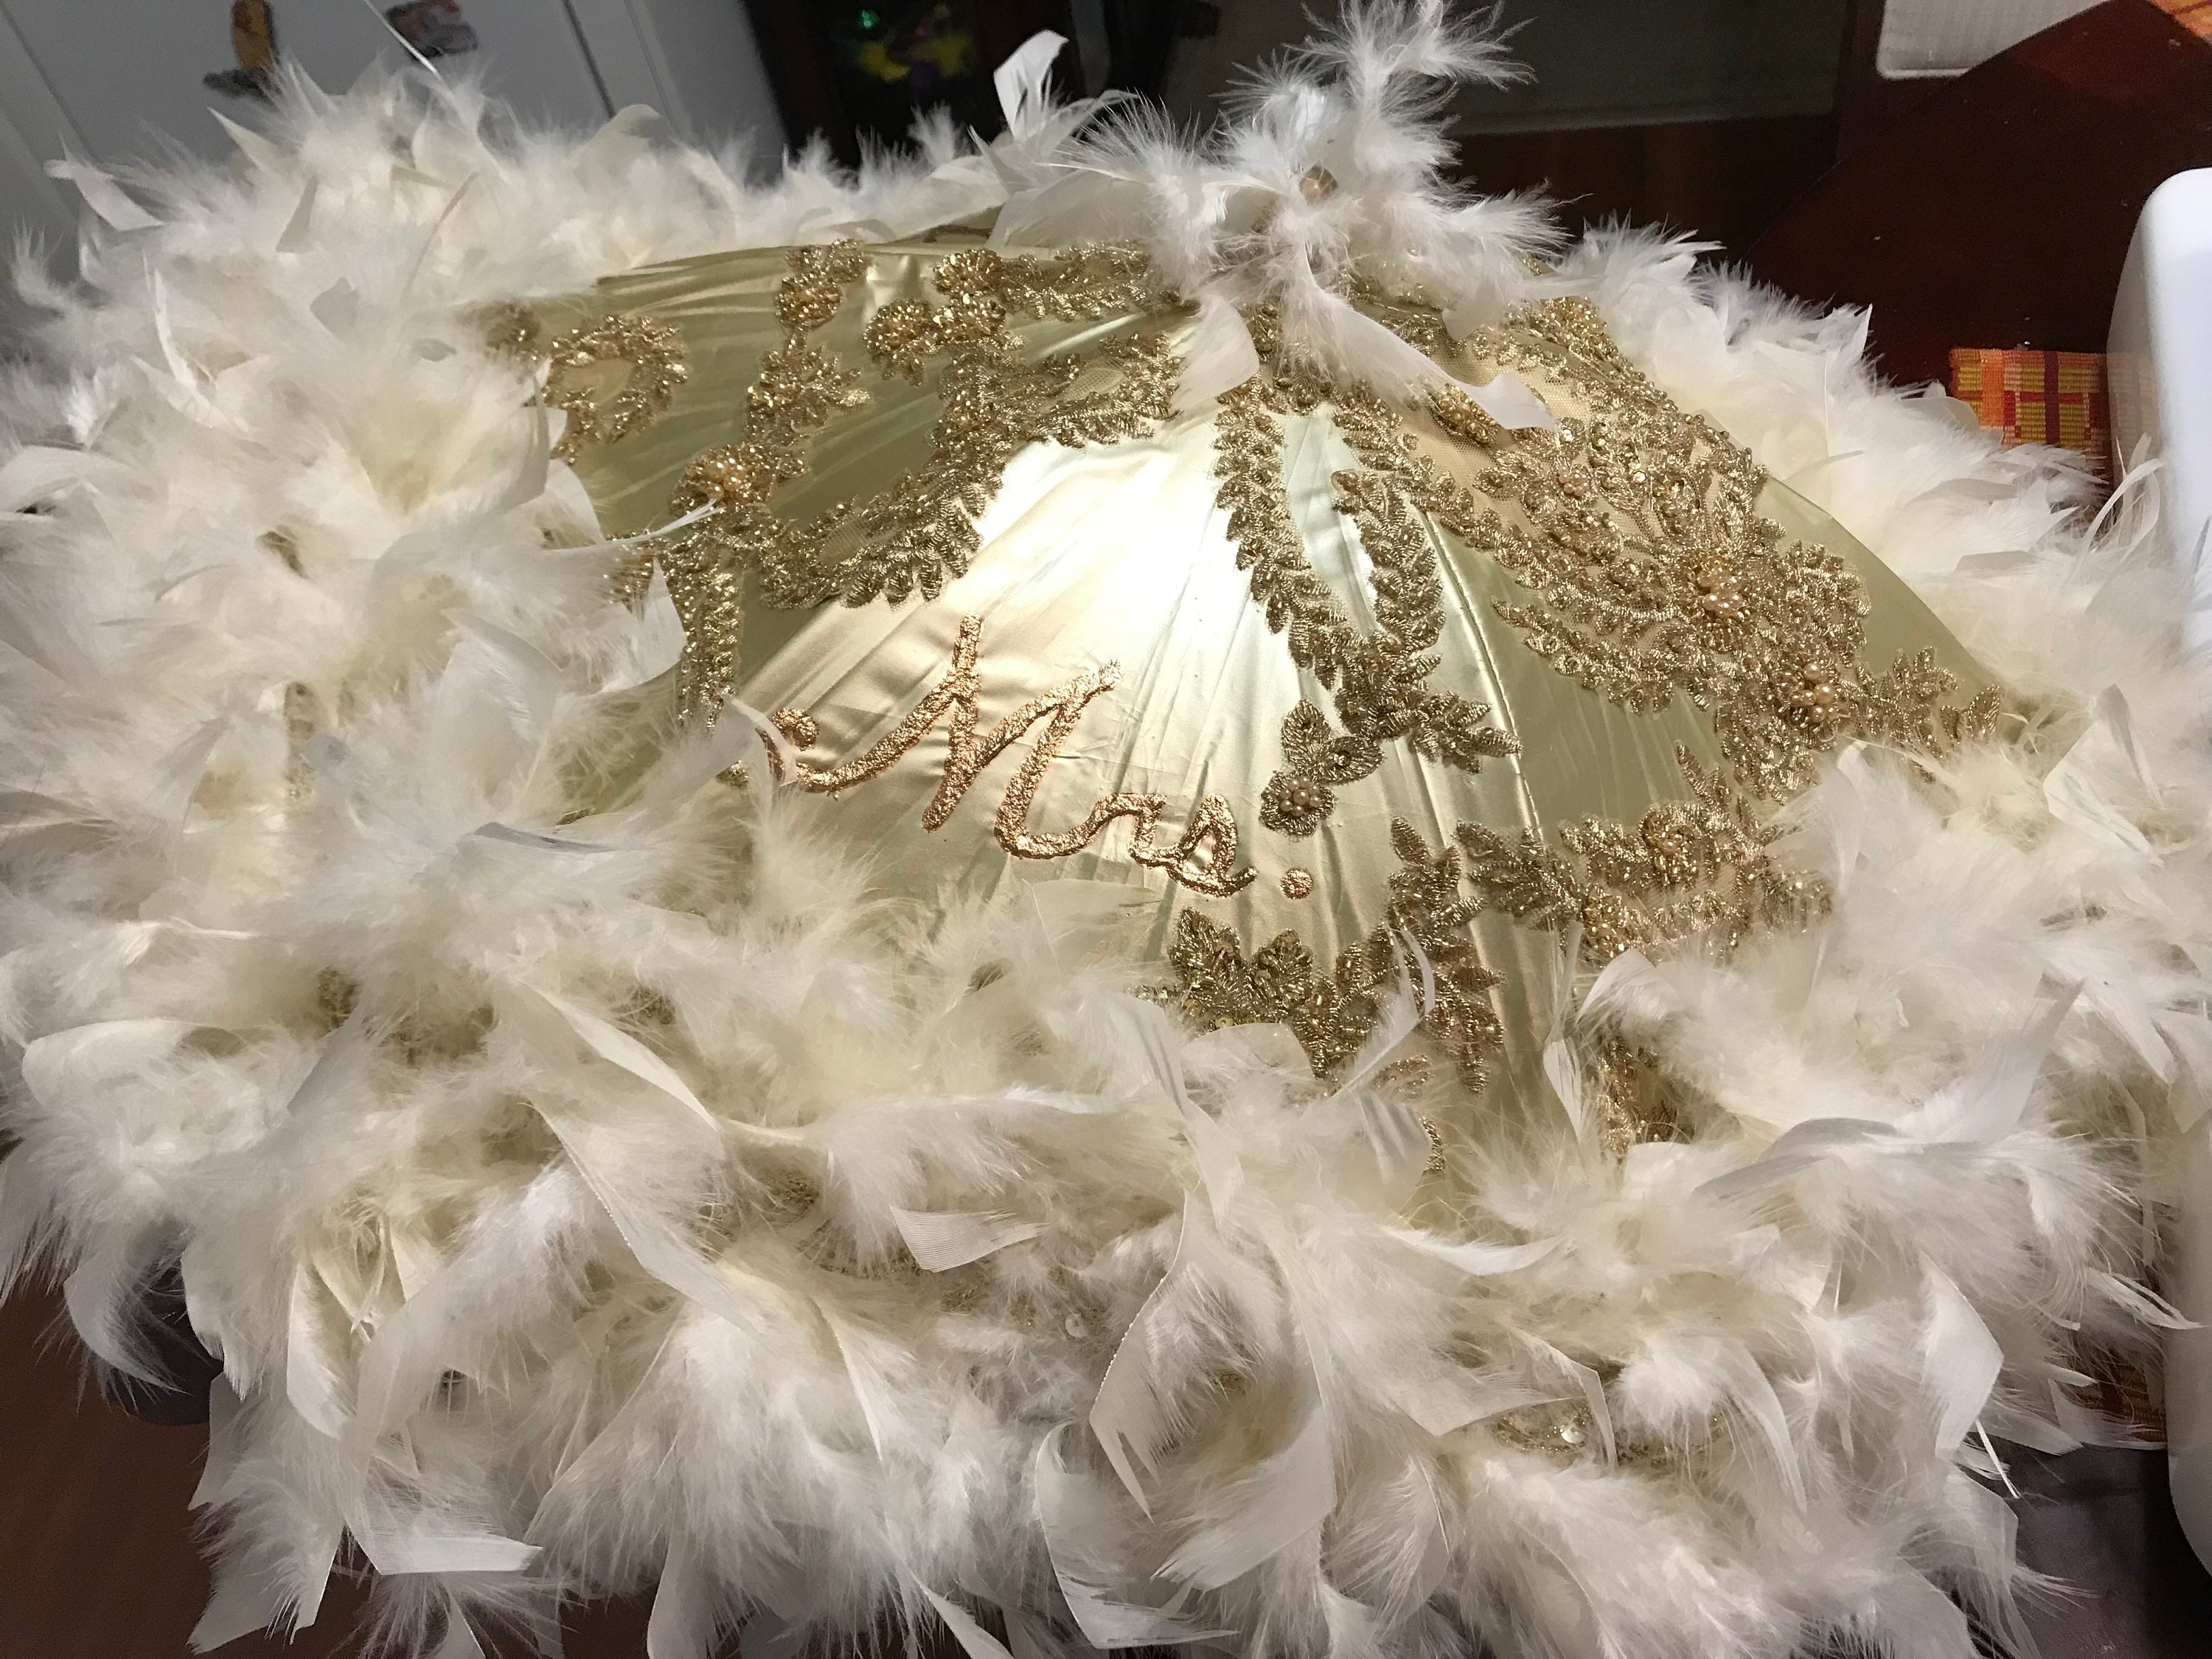 New Orleans Southern Lace Bride Second Line Umbrella - Etsy